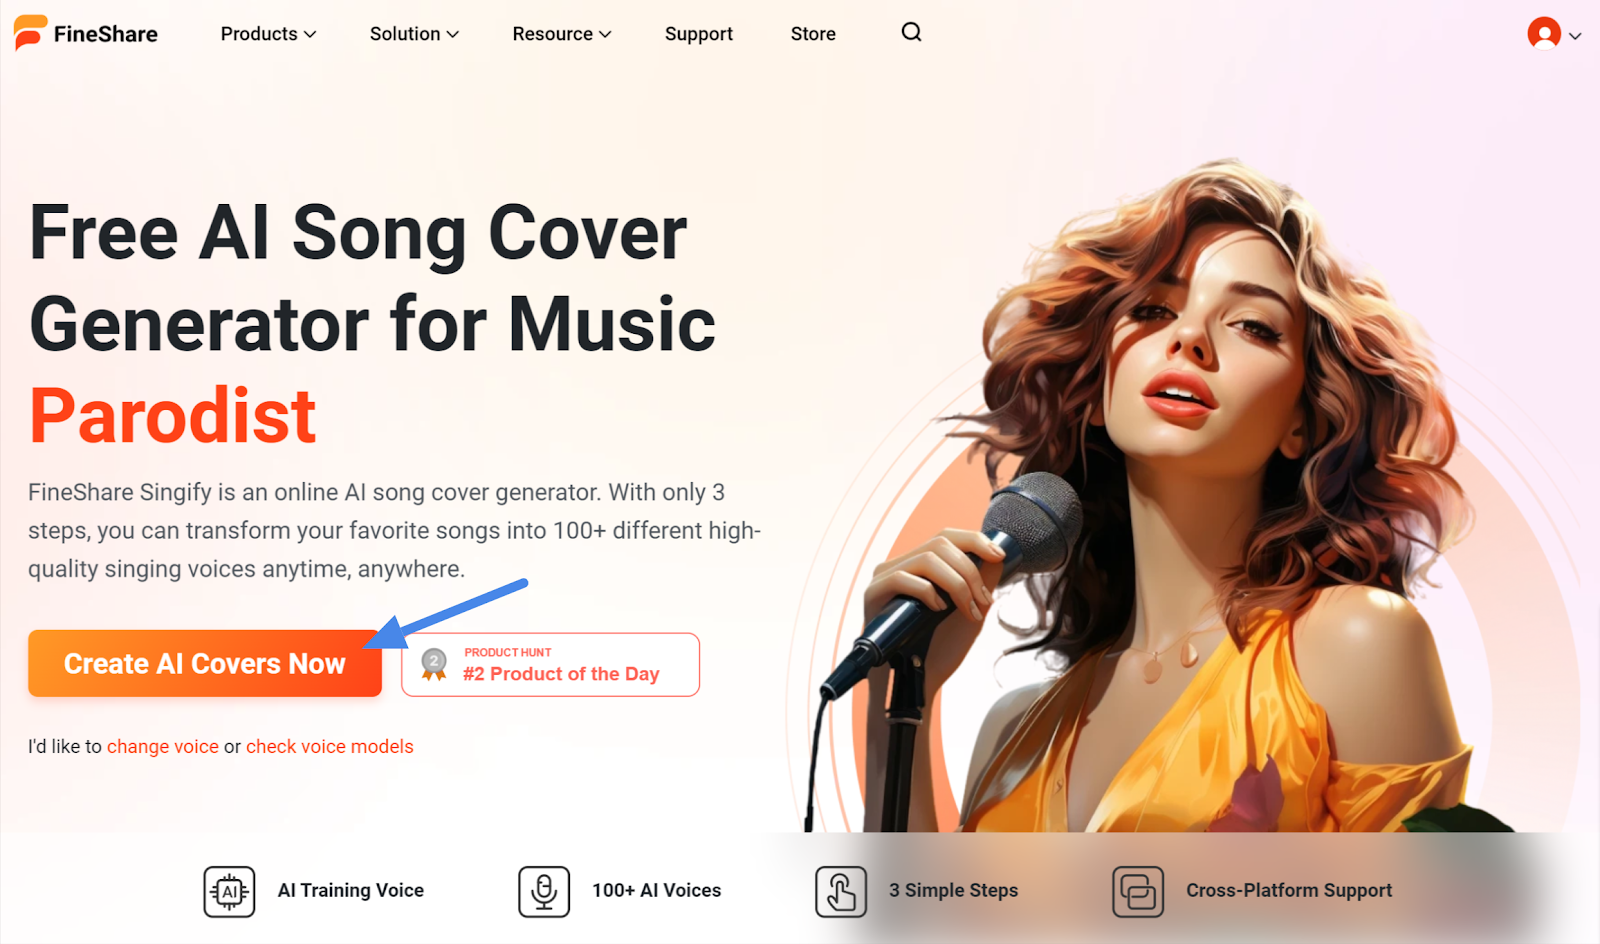 The FineShare Singify product page.